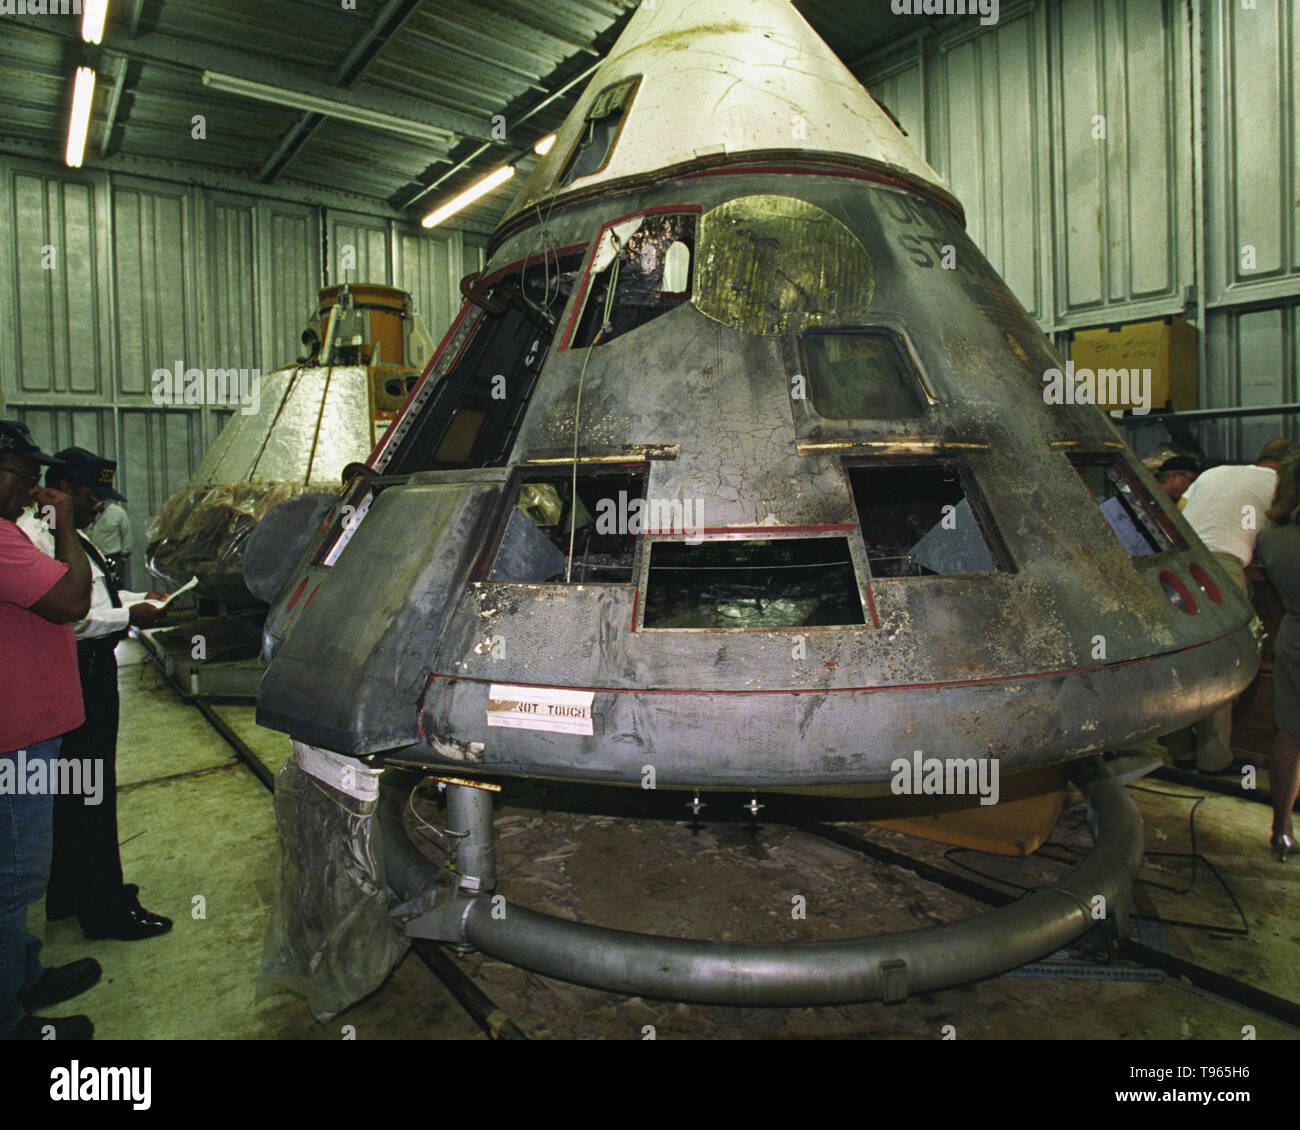 Apollo 1 wreckage inspection. Lawyer and technical expert Scott Grissom viewing the wreckage of the Apollo 1 command module. The Apollo 1 mission (originally Apollo/Saturn 204) resulted in disaster on January 27th 1967 when a fire broke out in the command module during a launch pad test in which all three of the primary crew died. Astronauts Virgil 'Gus' Ivan Grissom, Edward Higgins White II, and Roger Bruce Chaffee died in the accident. Stock Photo